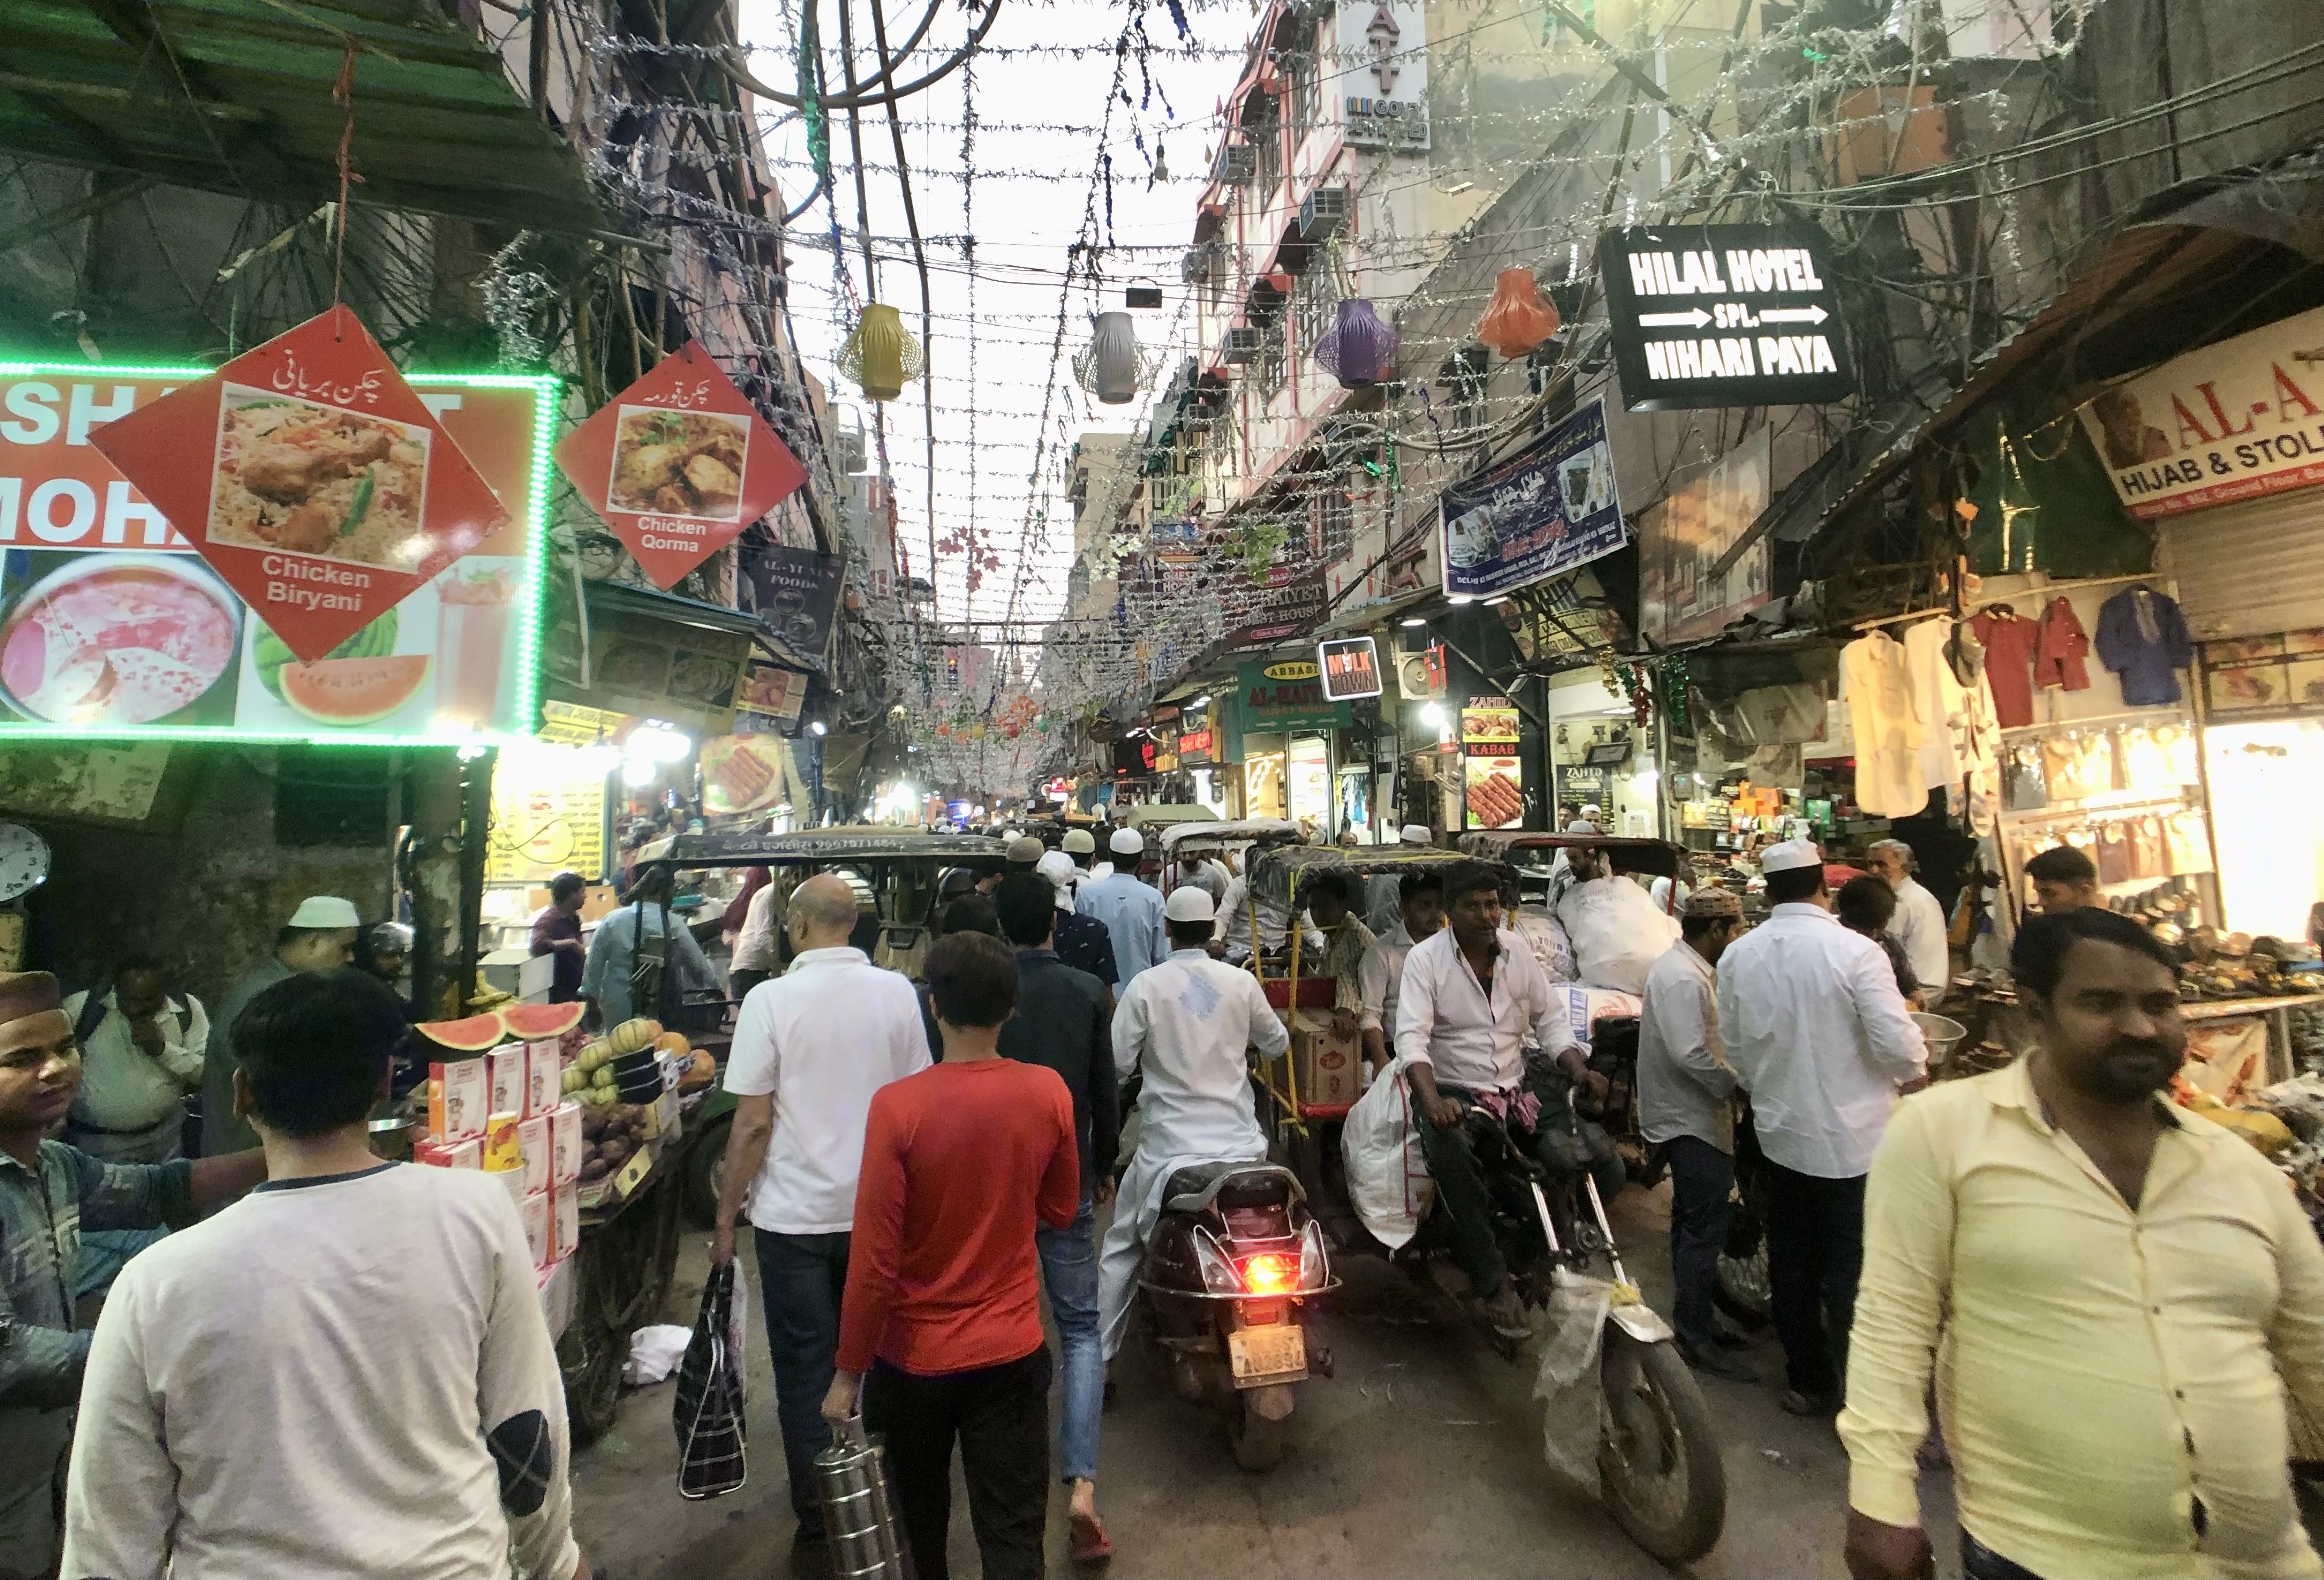 Matia Mahal road at dusk busy with people and motorcycles - this is a must on a heritage walk of Old Delhi